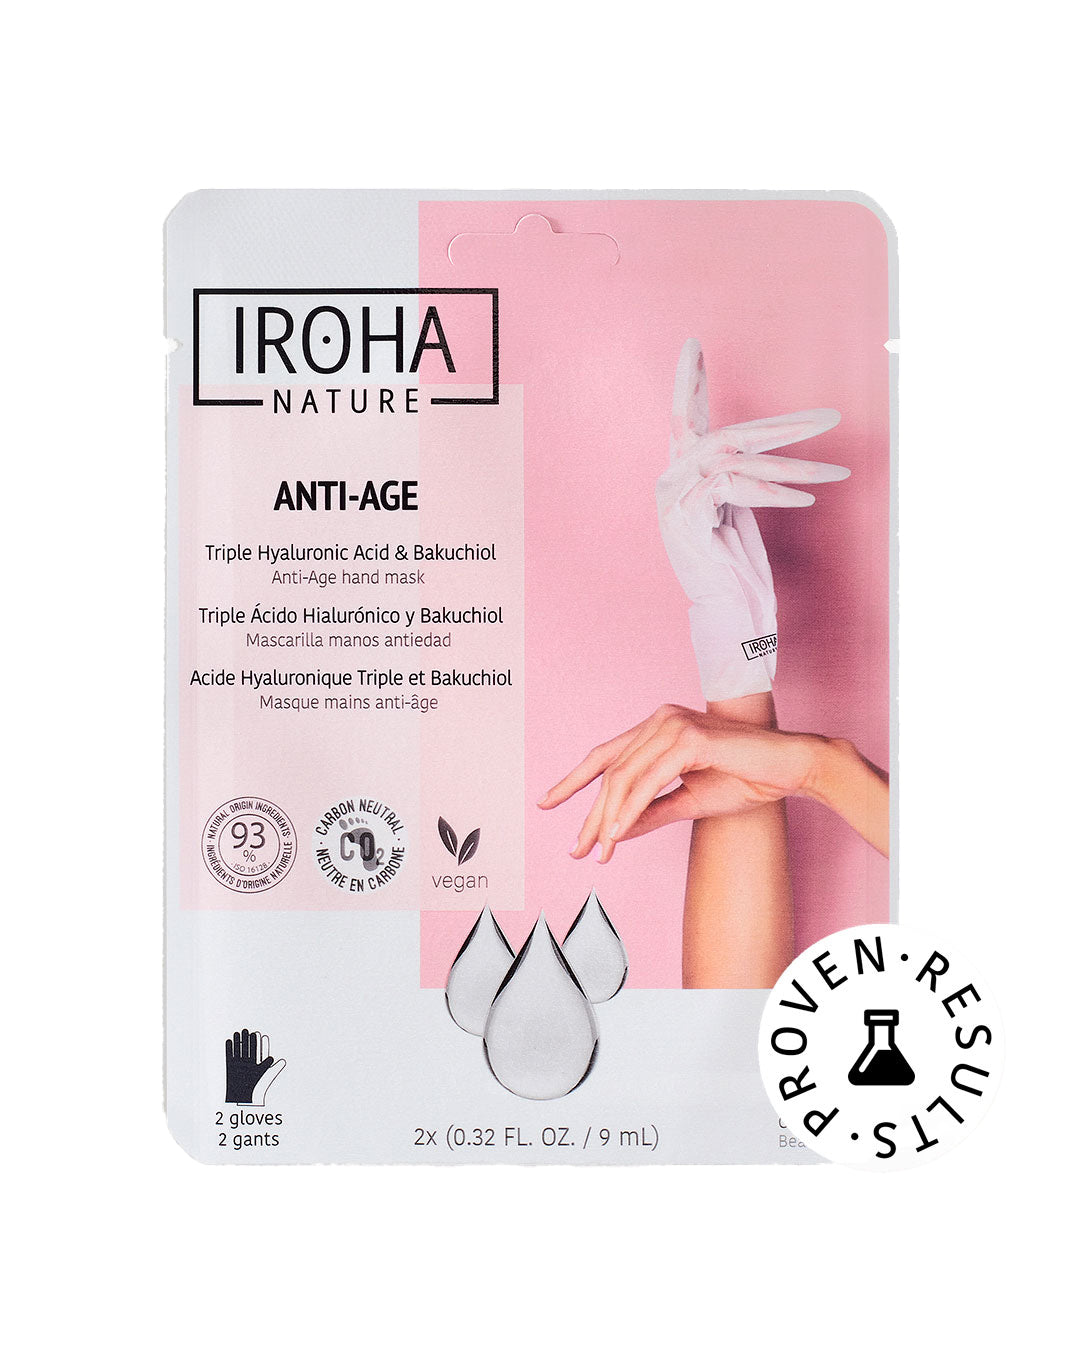 

"Iroha Nature Disposable Anti-Age Hand Mask Gloves with Triple Hyaluronic Acid, Bakuchiol, and Niacinamide 2 pcs x 9 ml"